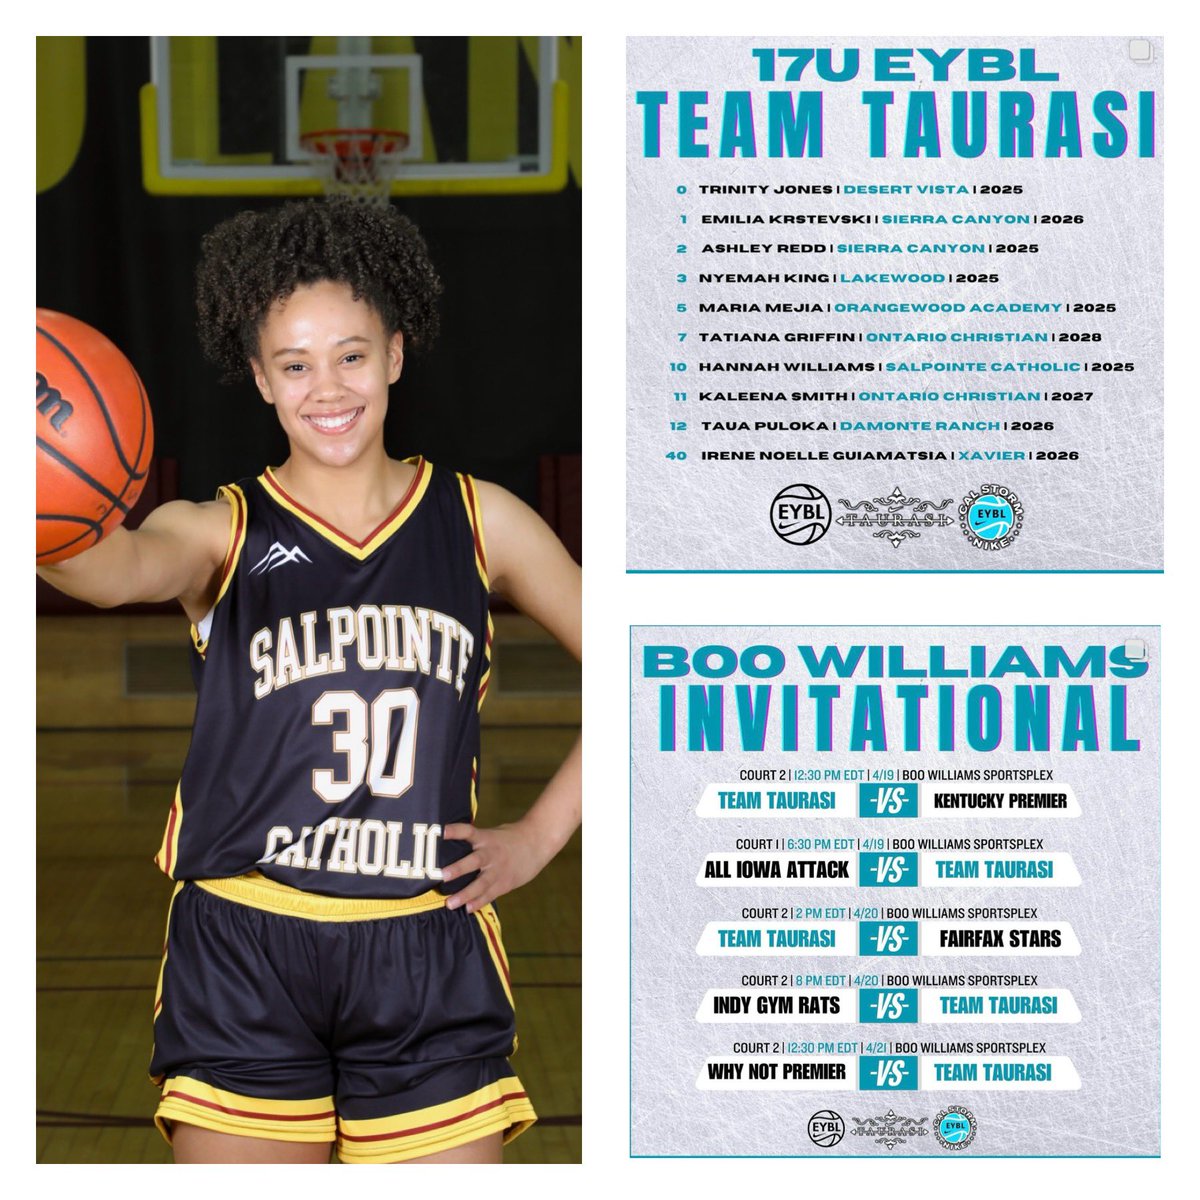 We’re in Virginia!! Team Taurasi’s schedule for EYBL Session 1!